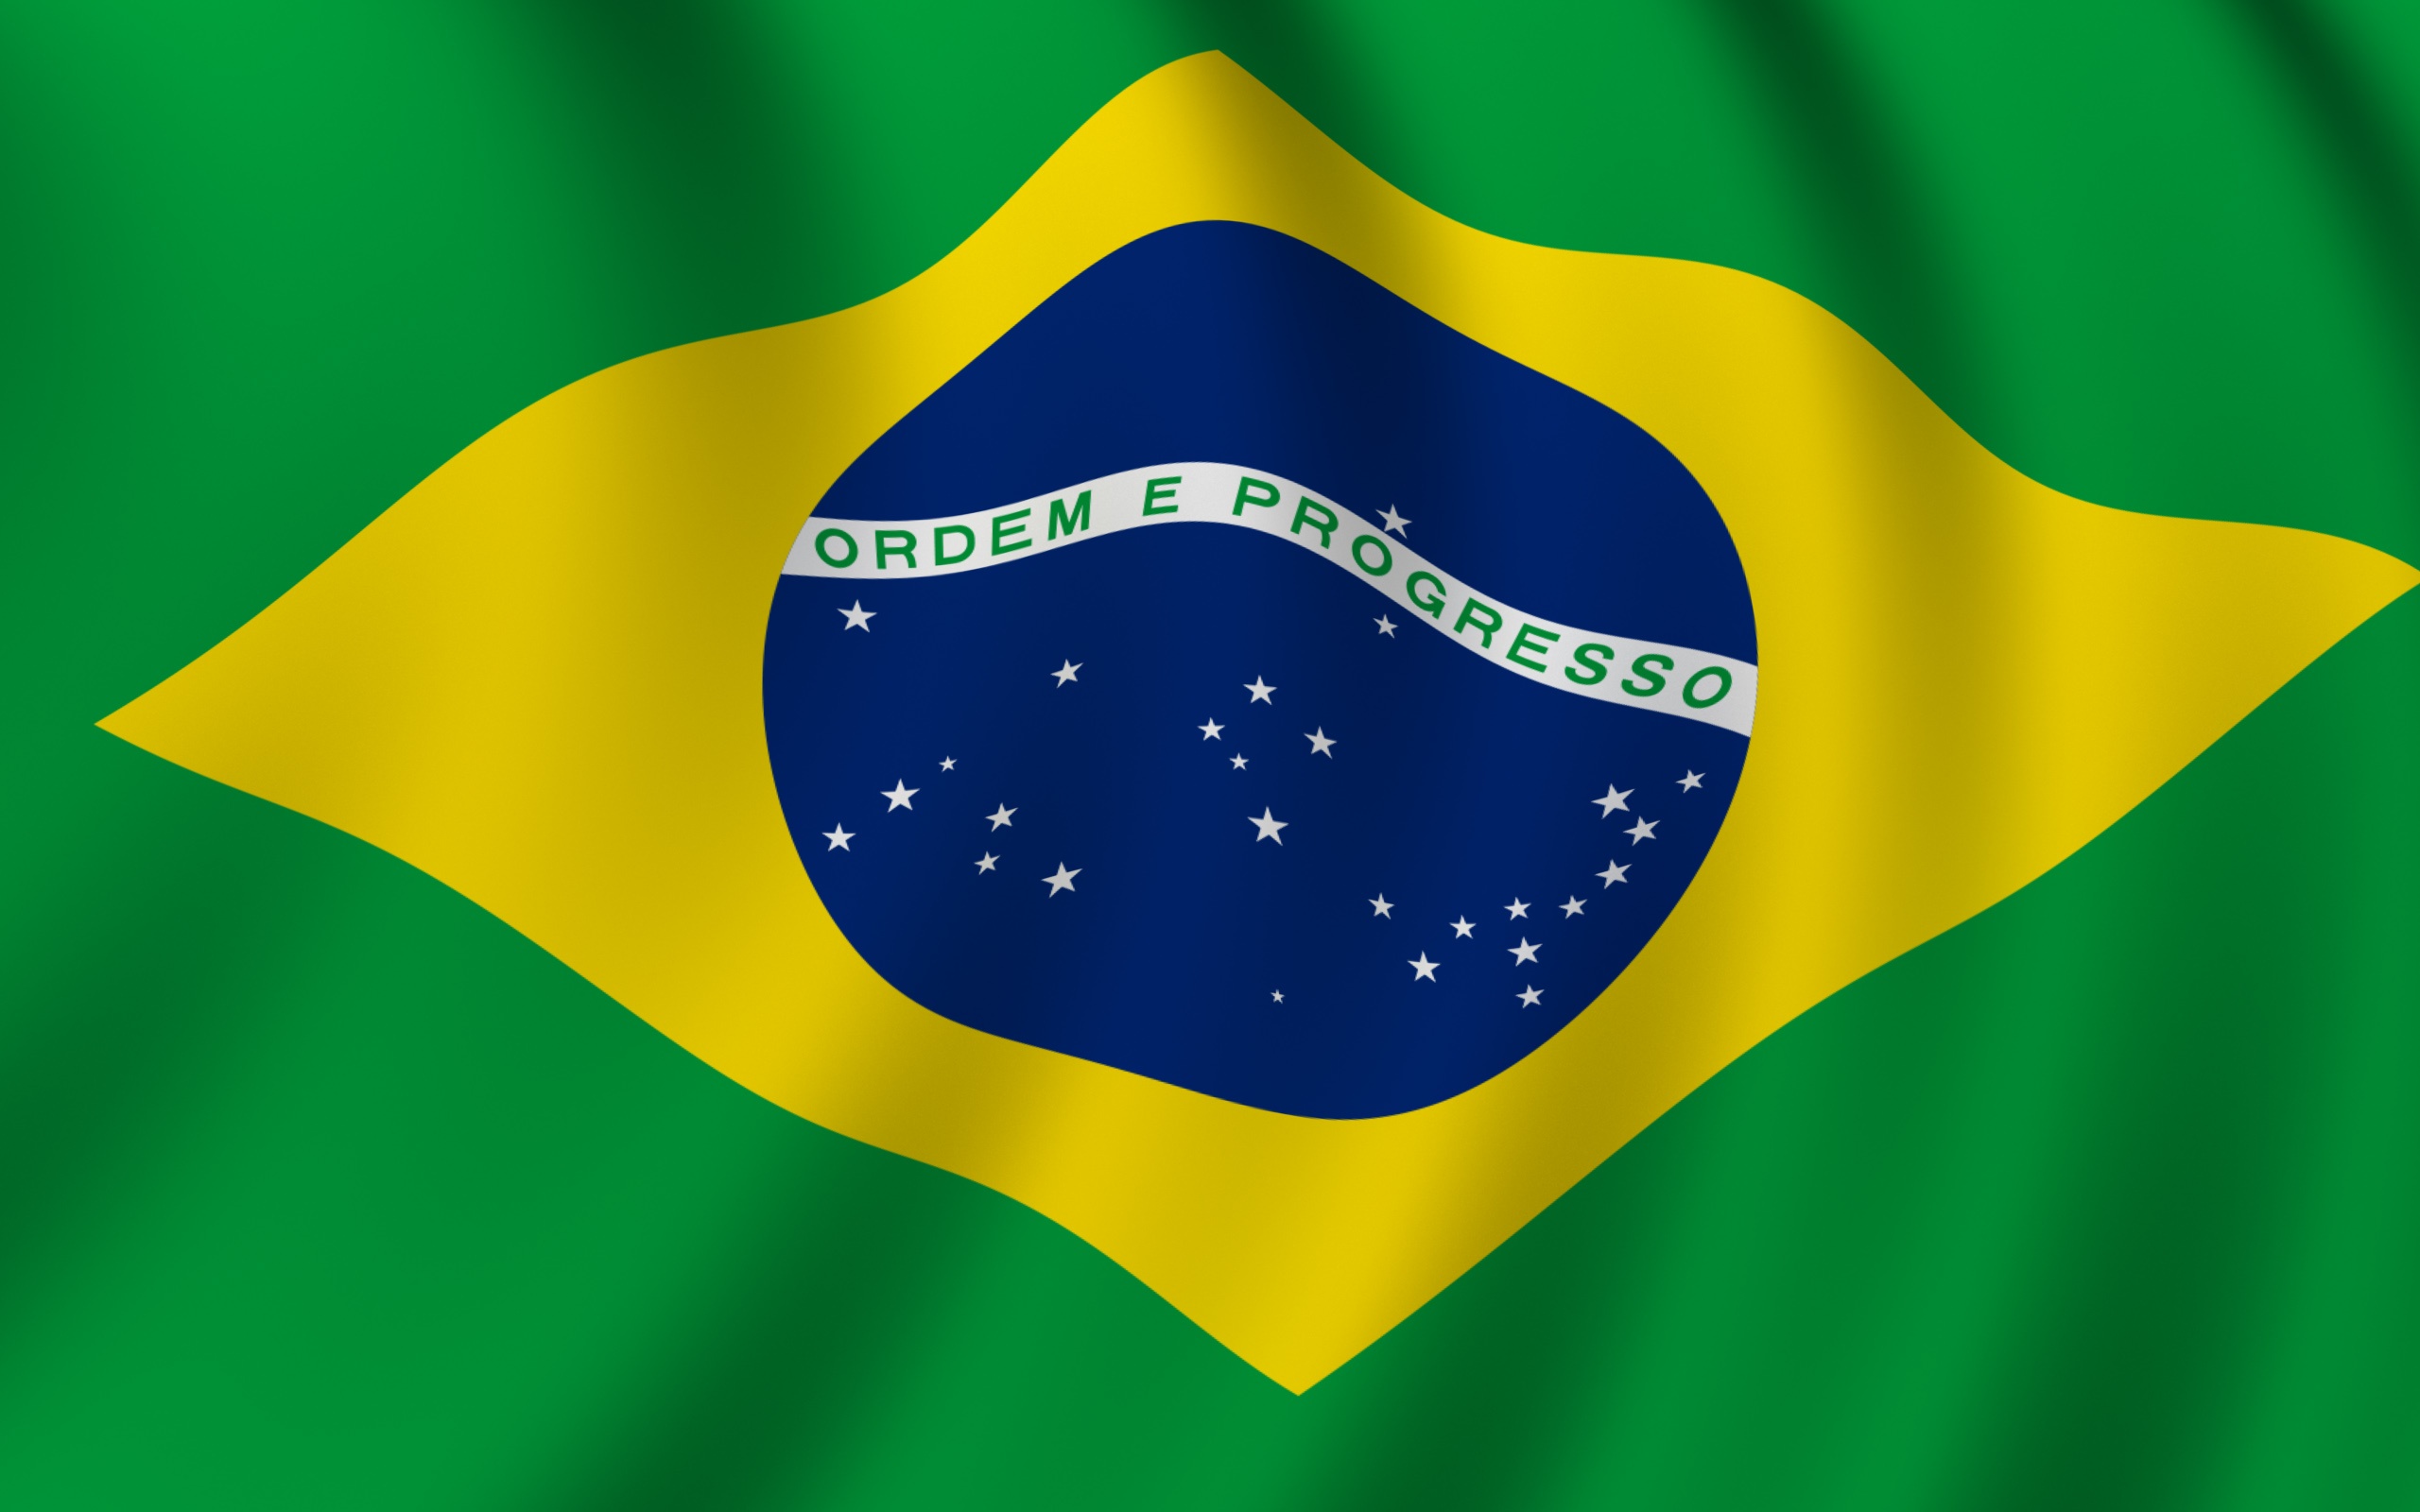 The Brazilian Flag What Does The Brazilian Flag Mean 023nln 